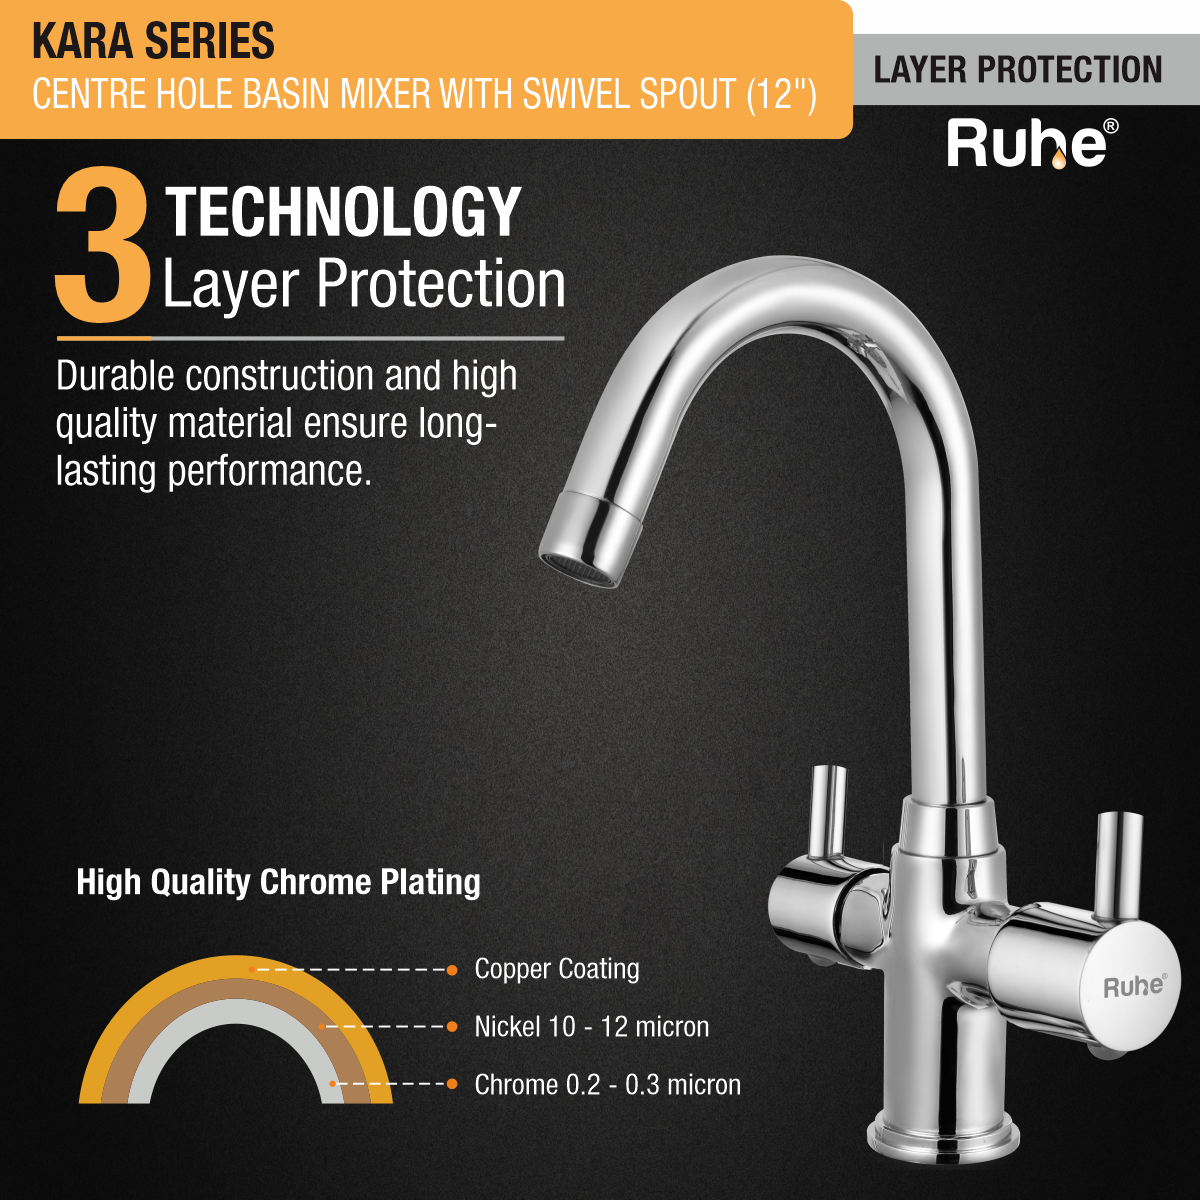 Kara Centre Hole Basin Mixer with Small (12 inches) Round Swivel Spout Faucet 3 layer protection